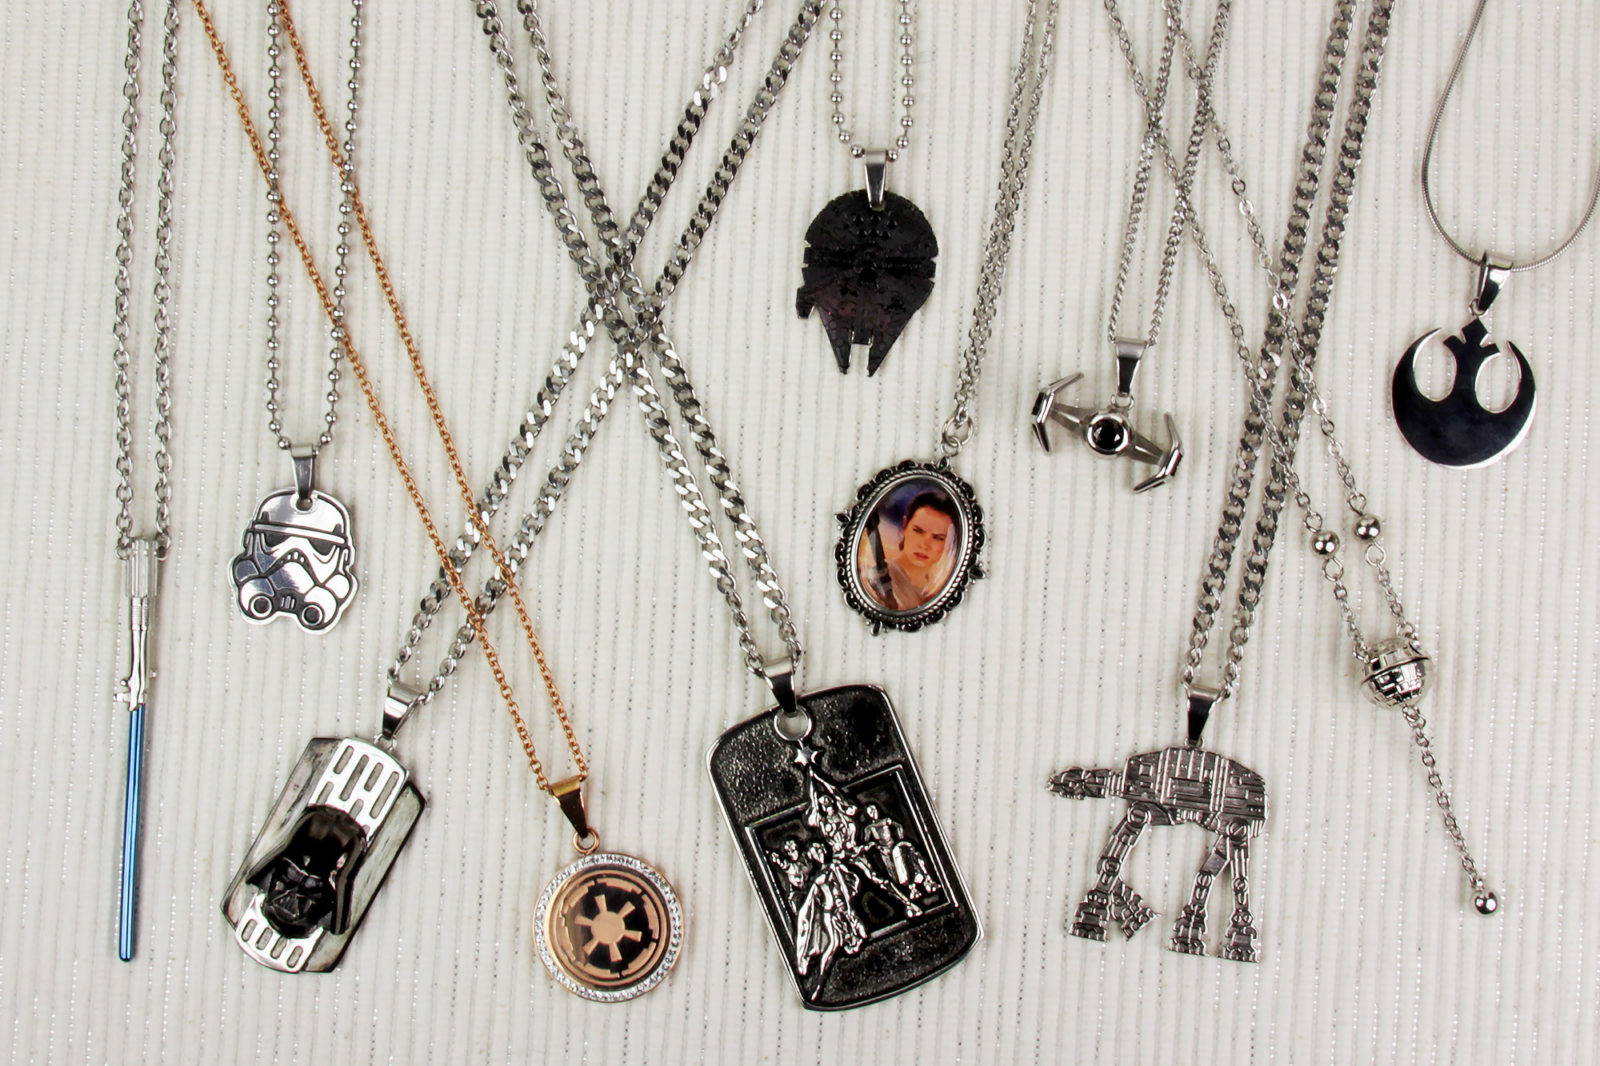 Body Vibe x Star Wars necklaces